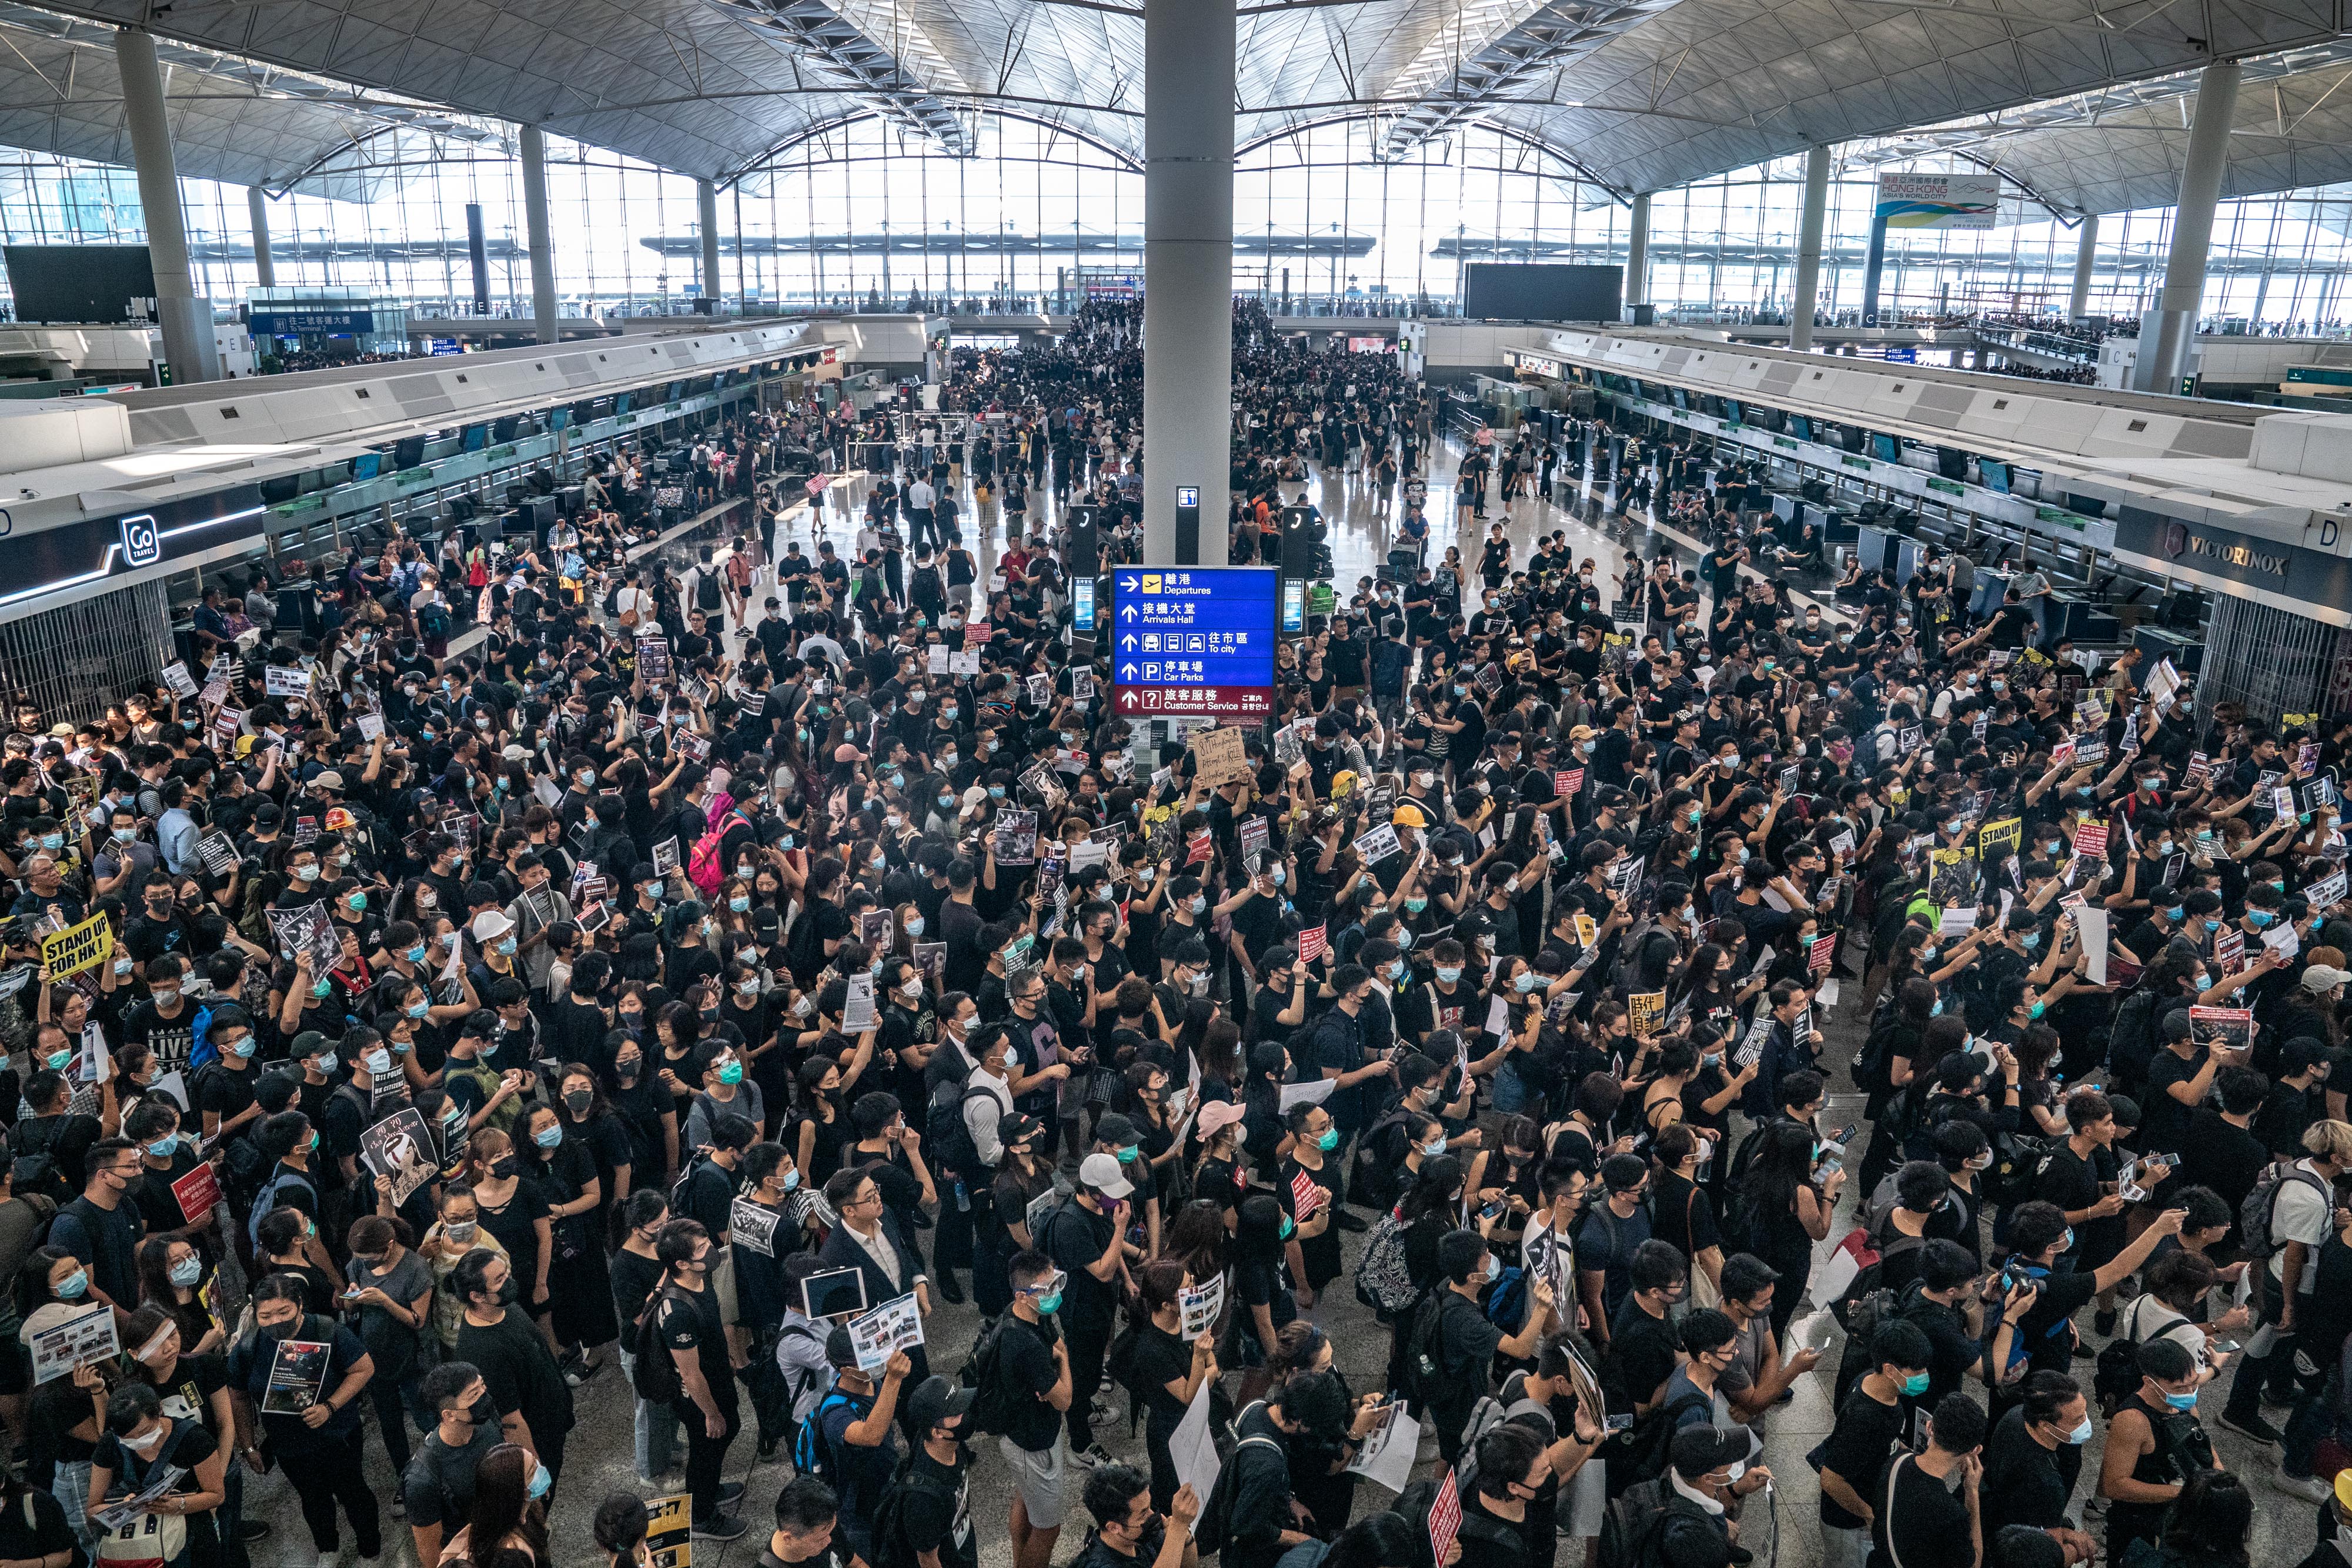 Protesters occupy the departure hall of the Hong Kong International Airport during a demonstration on August 12, 2019.